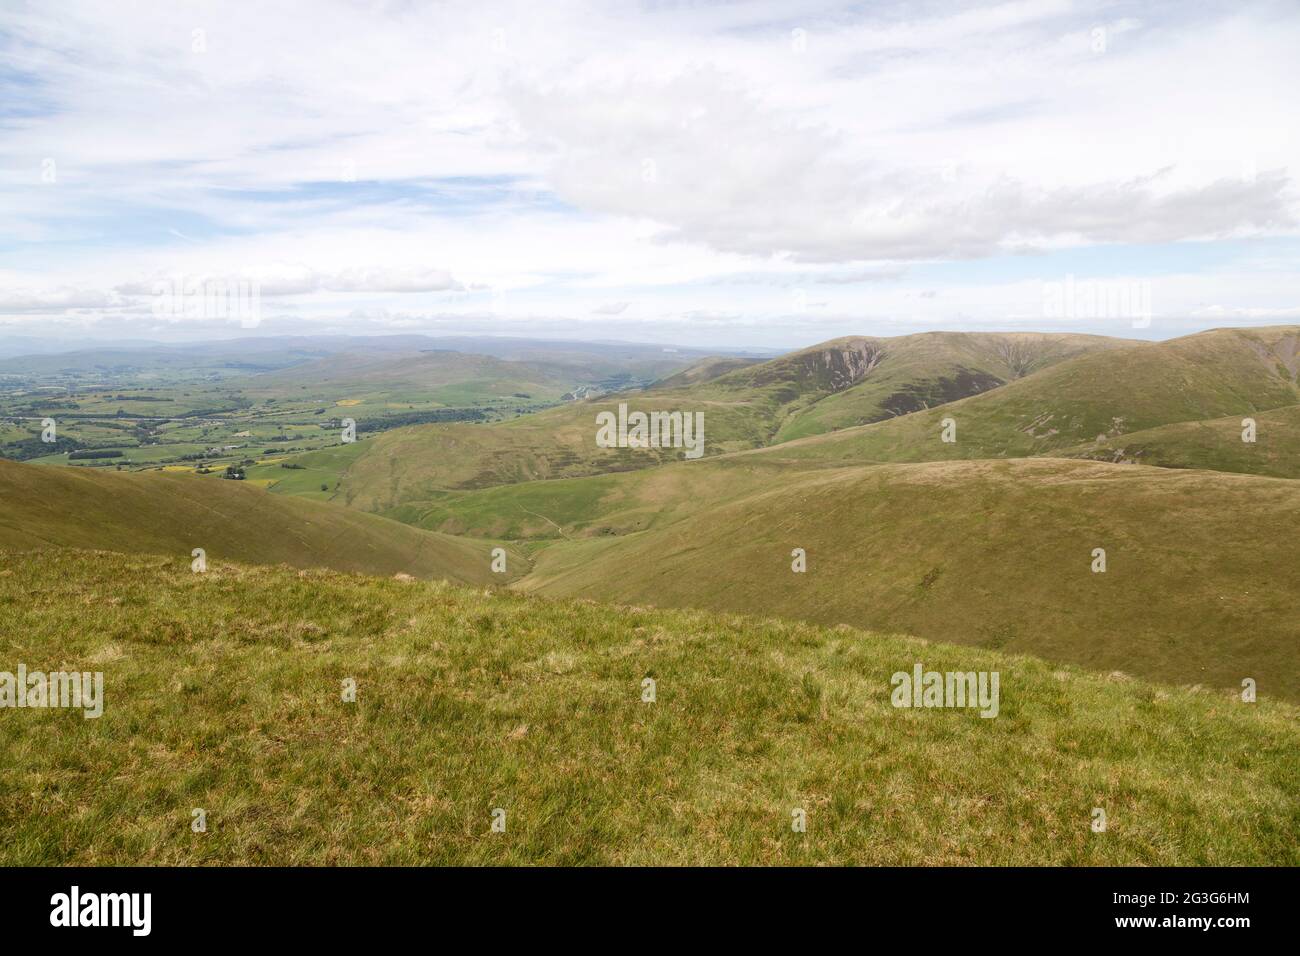 View from Arant Haw in the Yorkshire Dales National Park. The countryside is green and rolling. Stock Photo